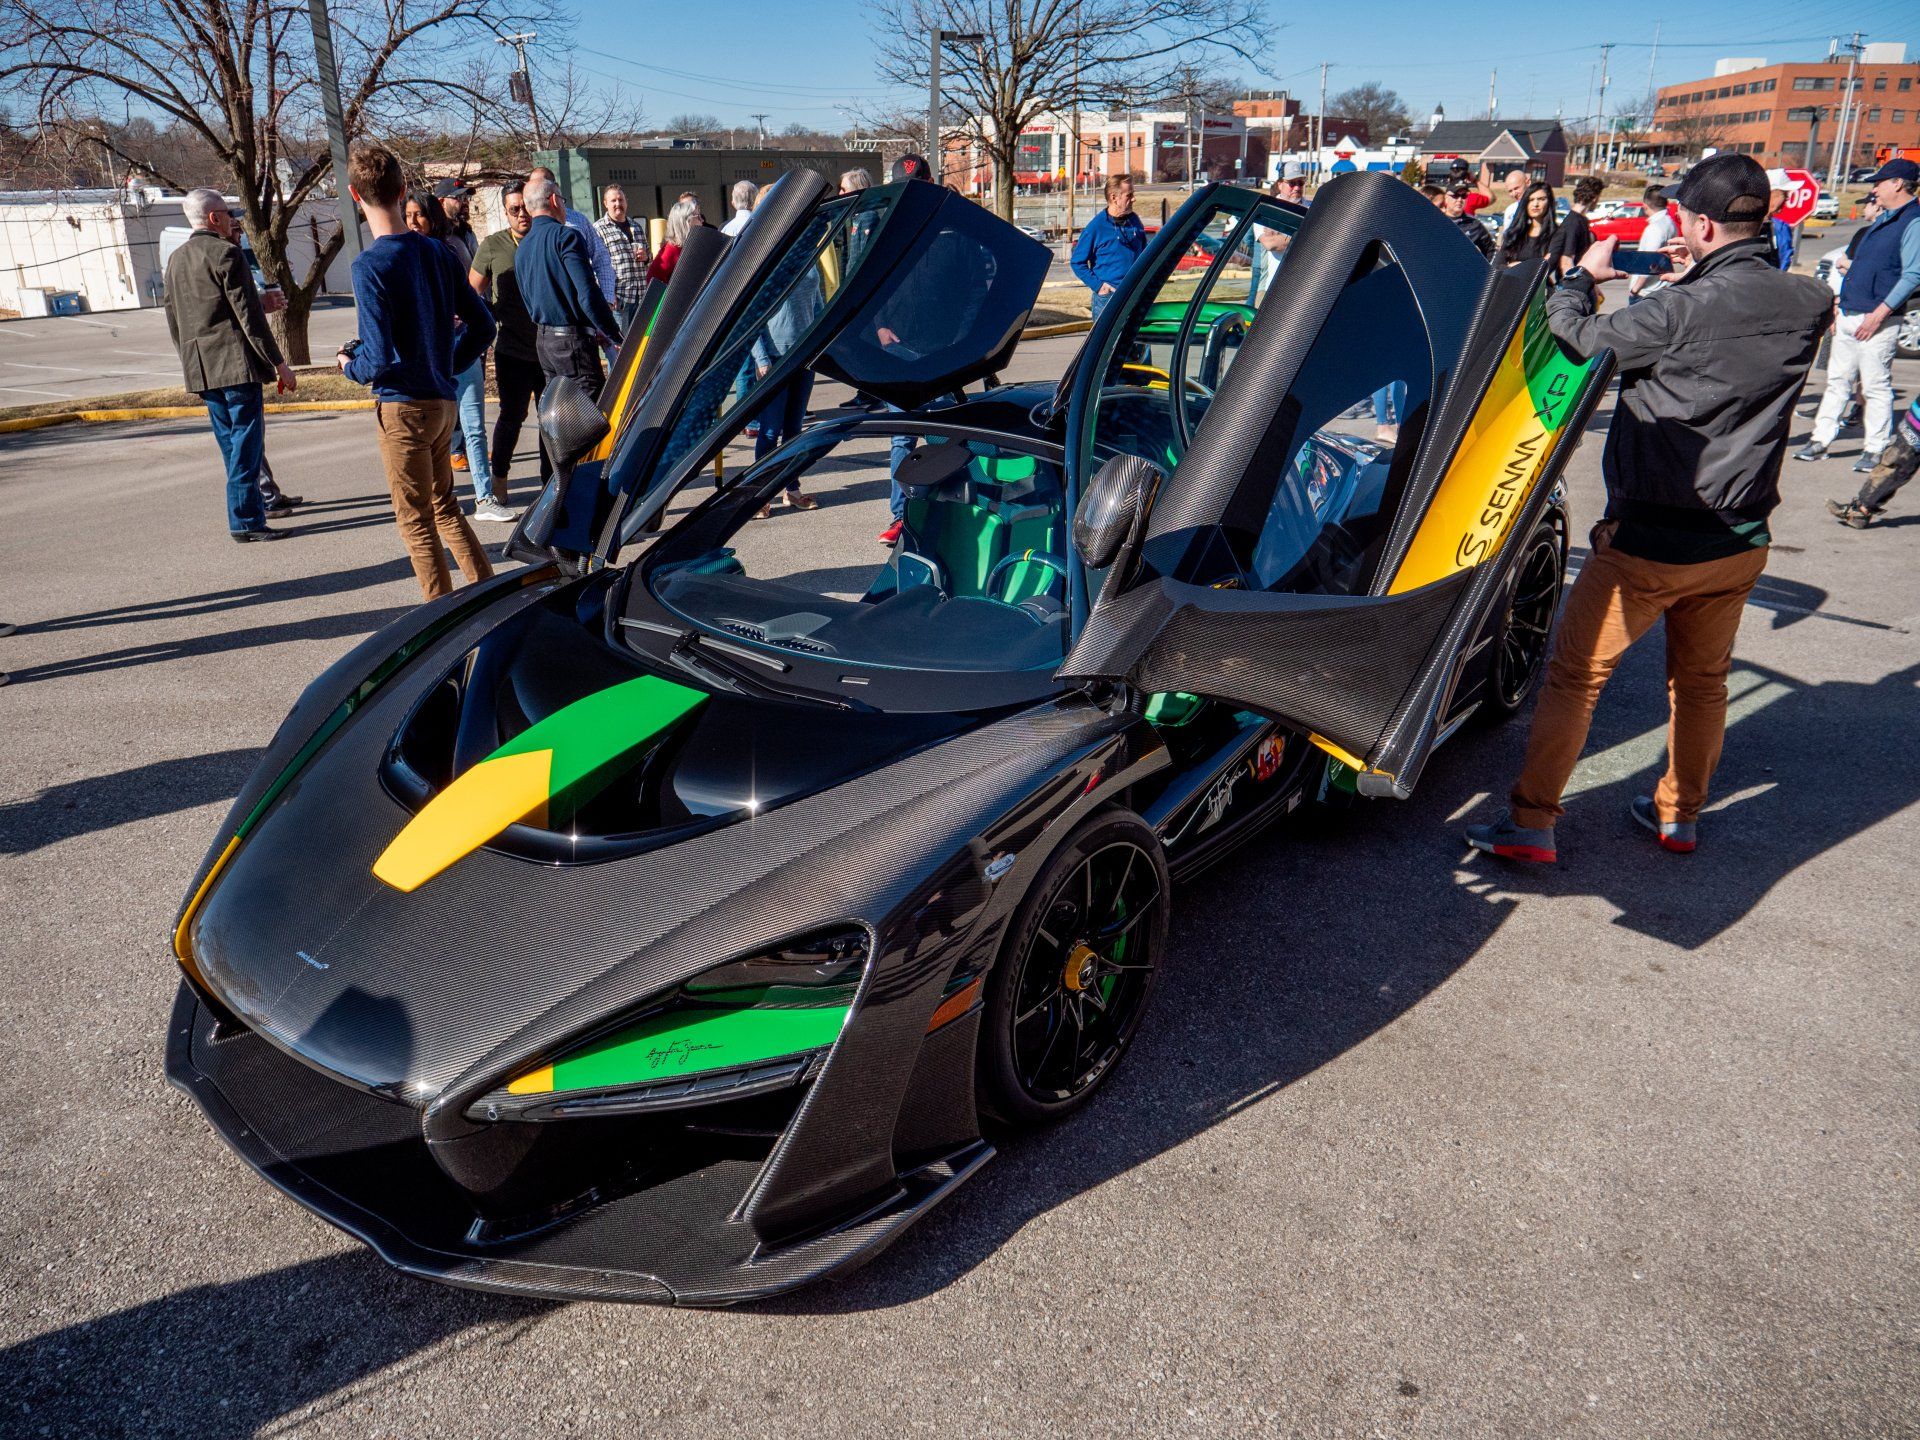 Ralph Williams with Glossy working on a Mclaren Senna XP1 during a St. Louis event